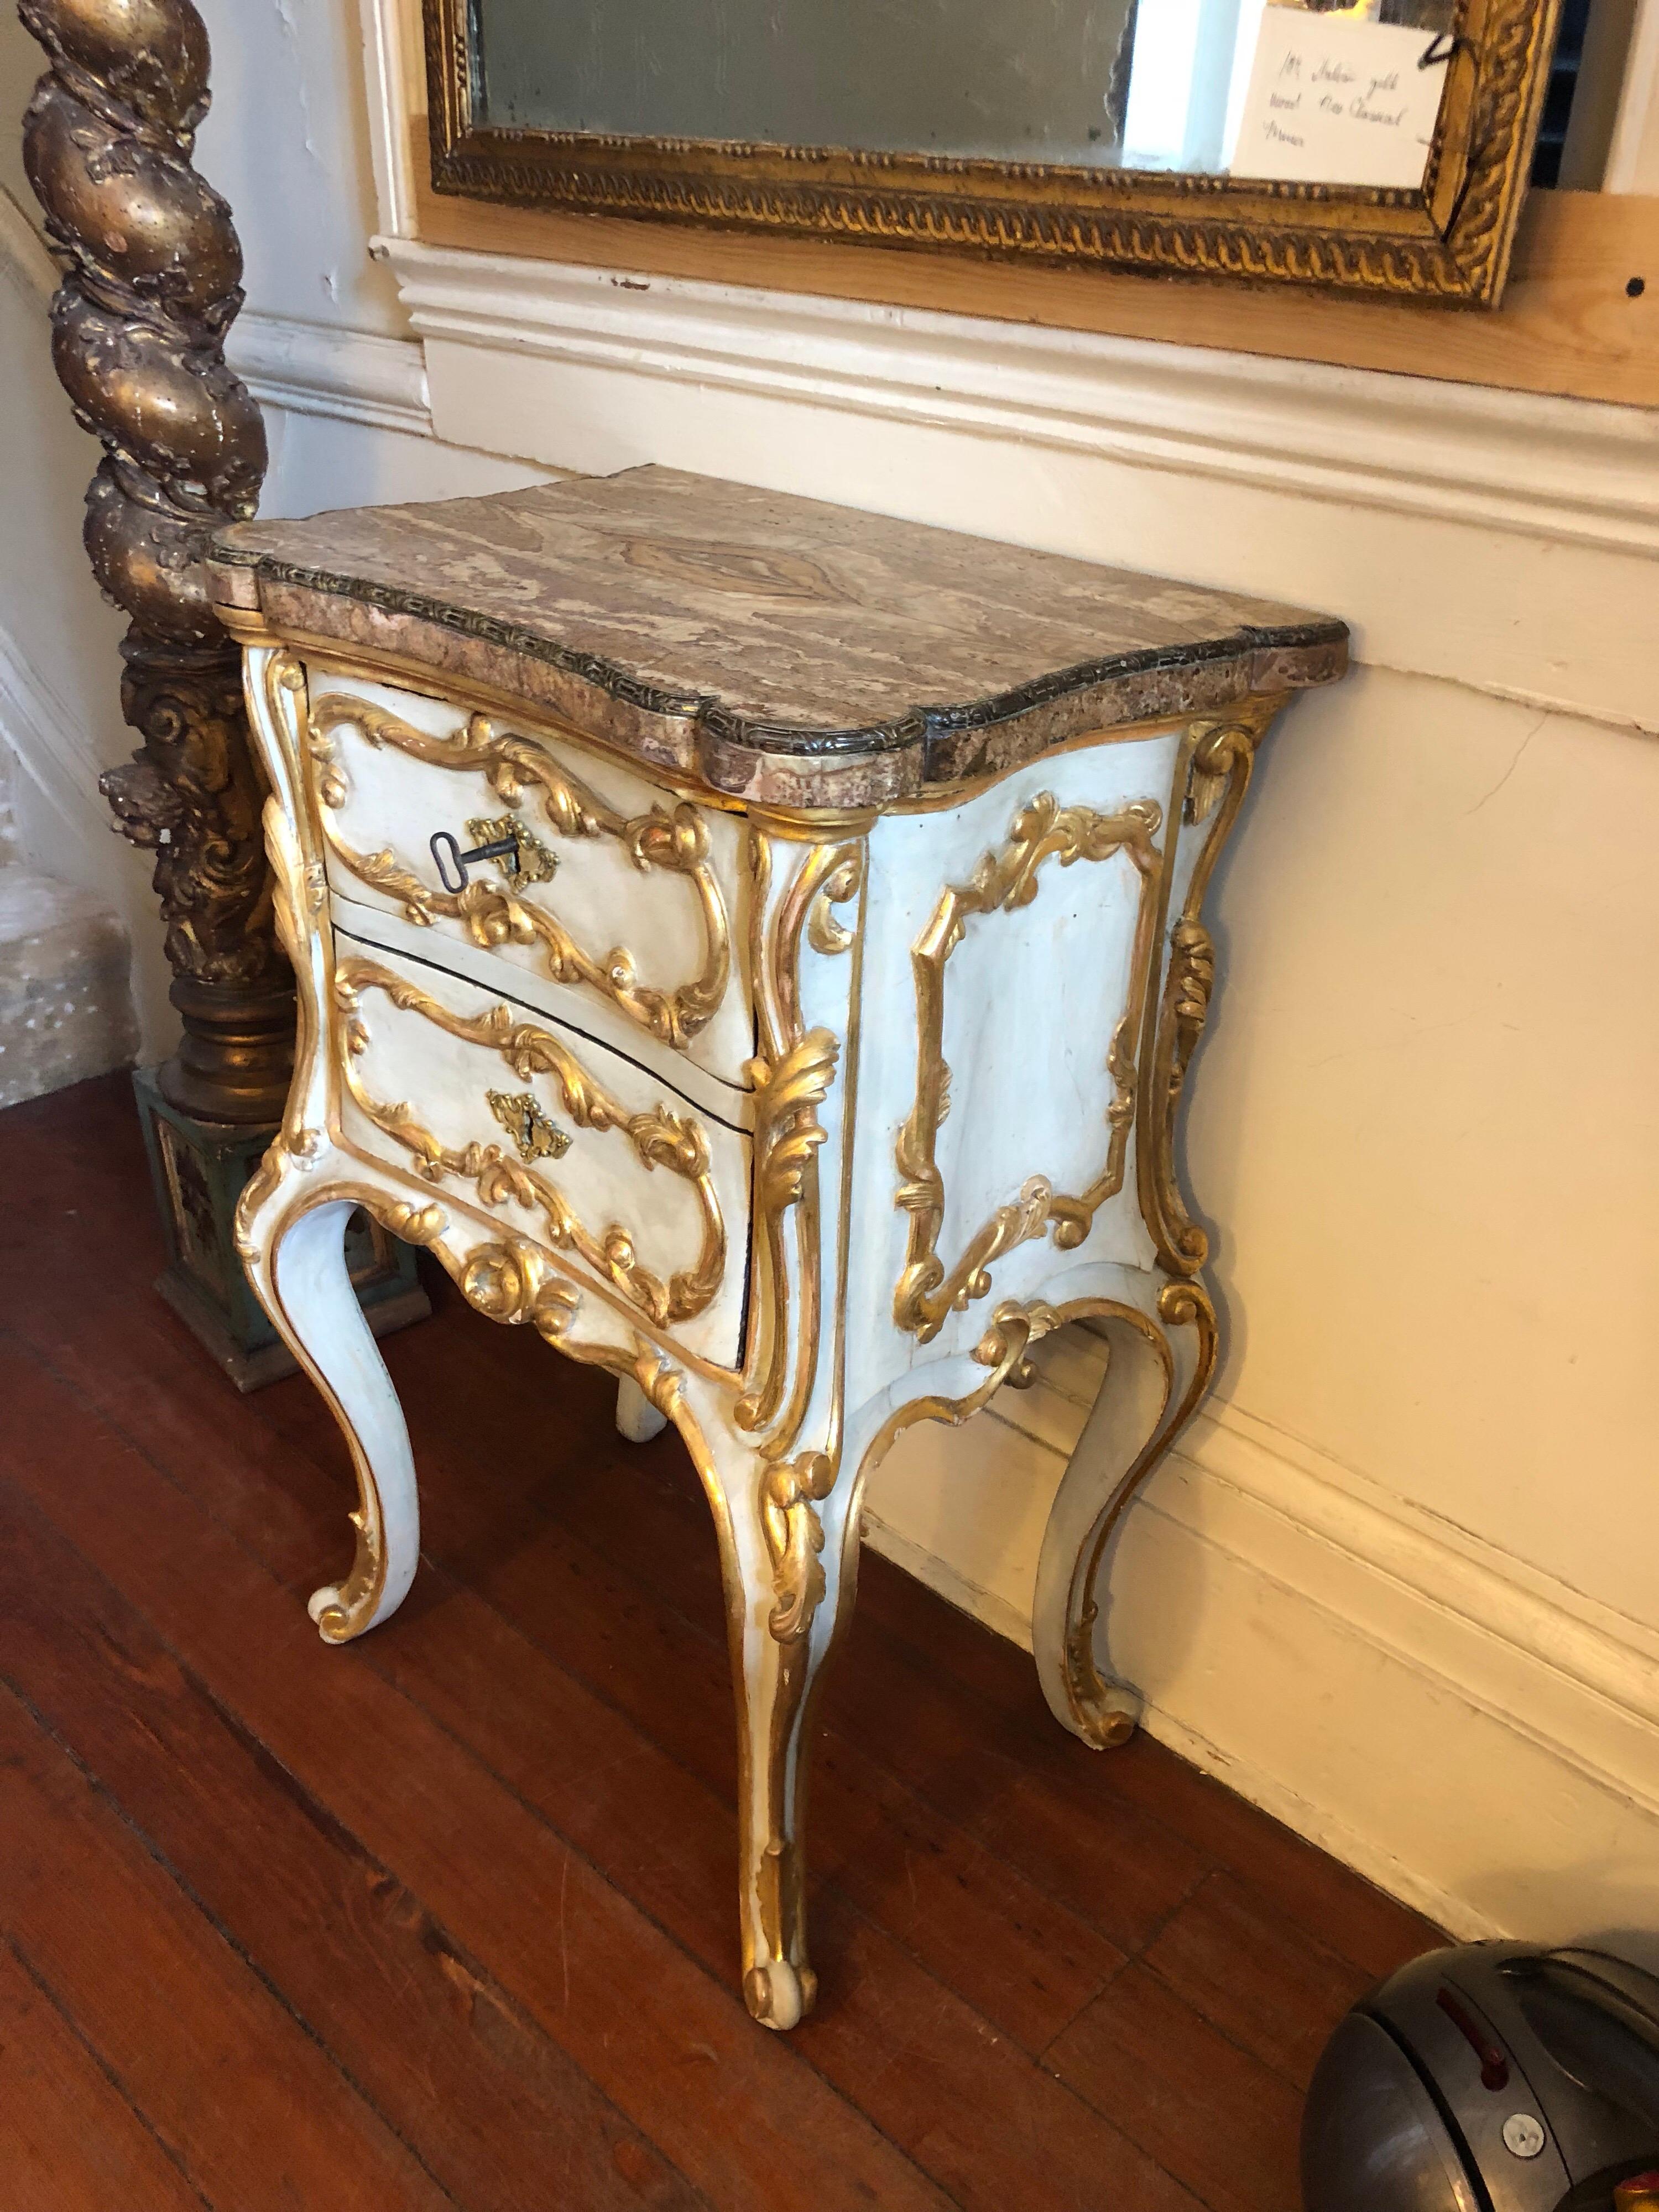 Italian Baroque painted and parcel-gilt commodini with bronze inlaid onyx top. From a roman noble family. This commodini is exceptional quality. The top is bookmatched with bronze inlaid trim. Case has two drawers on cabriole legs.
 